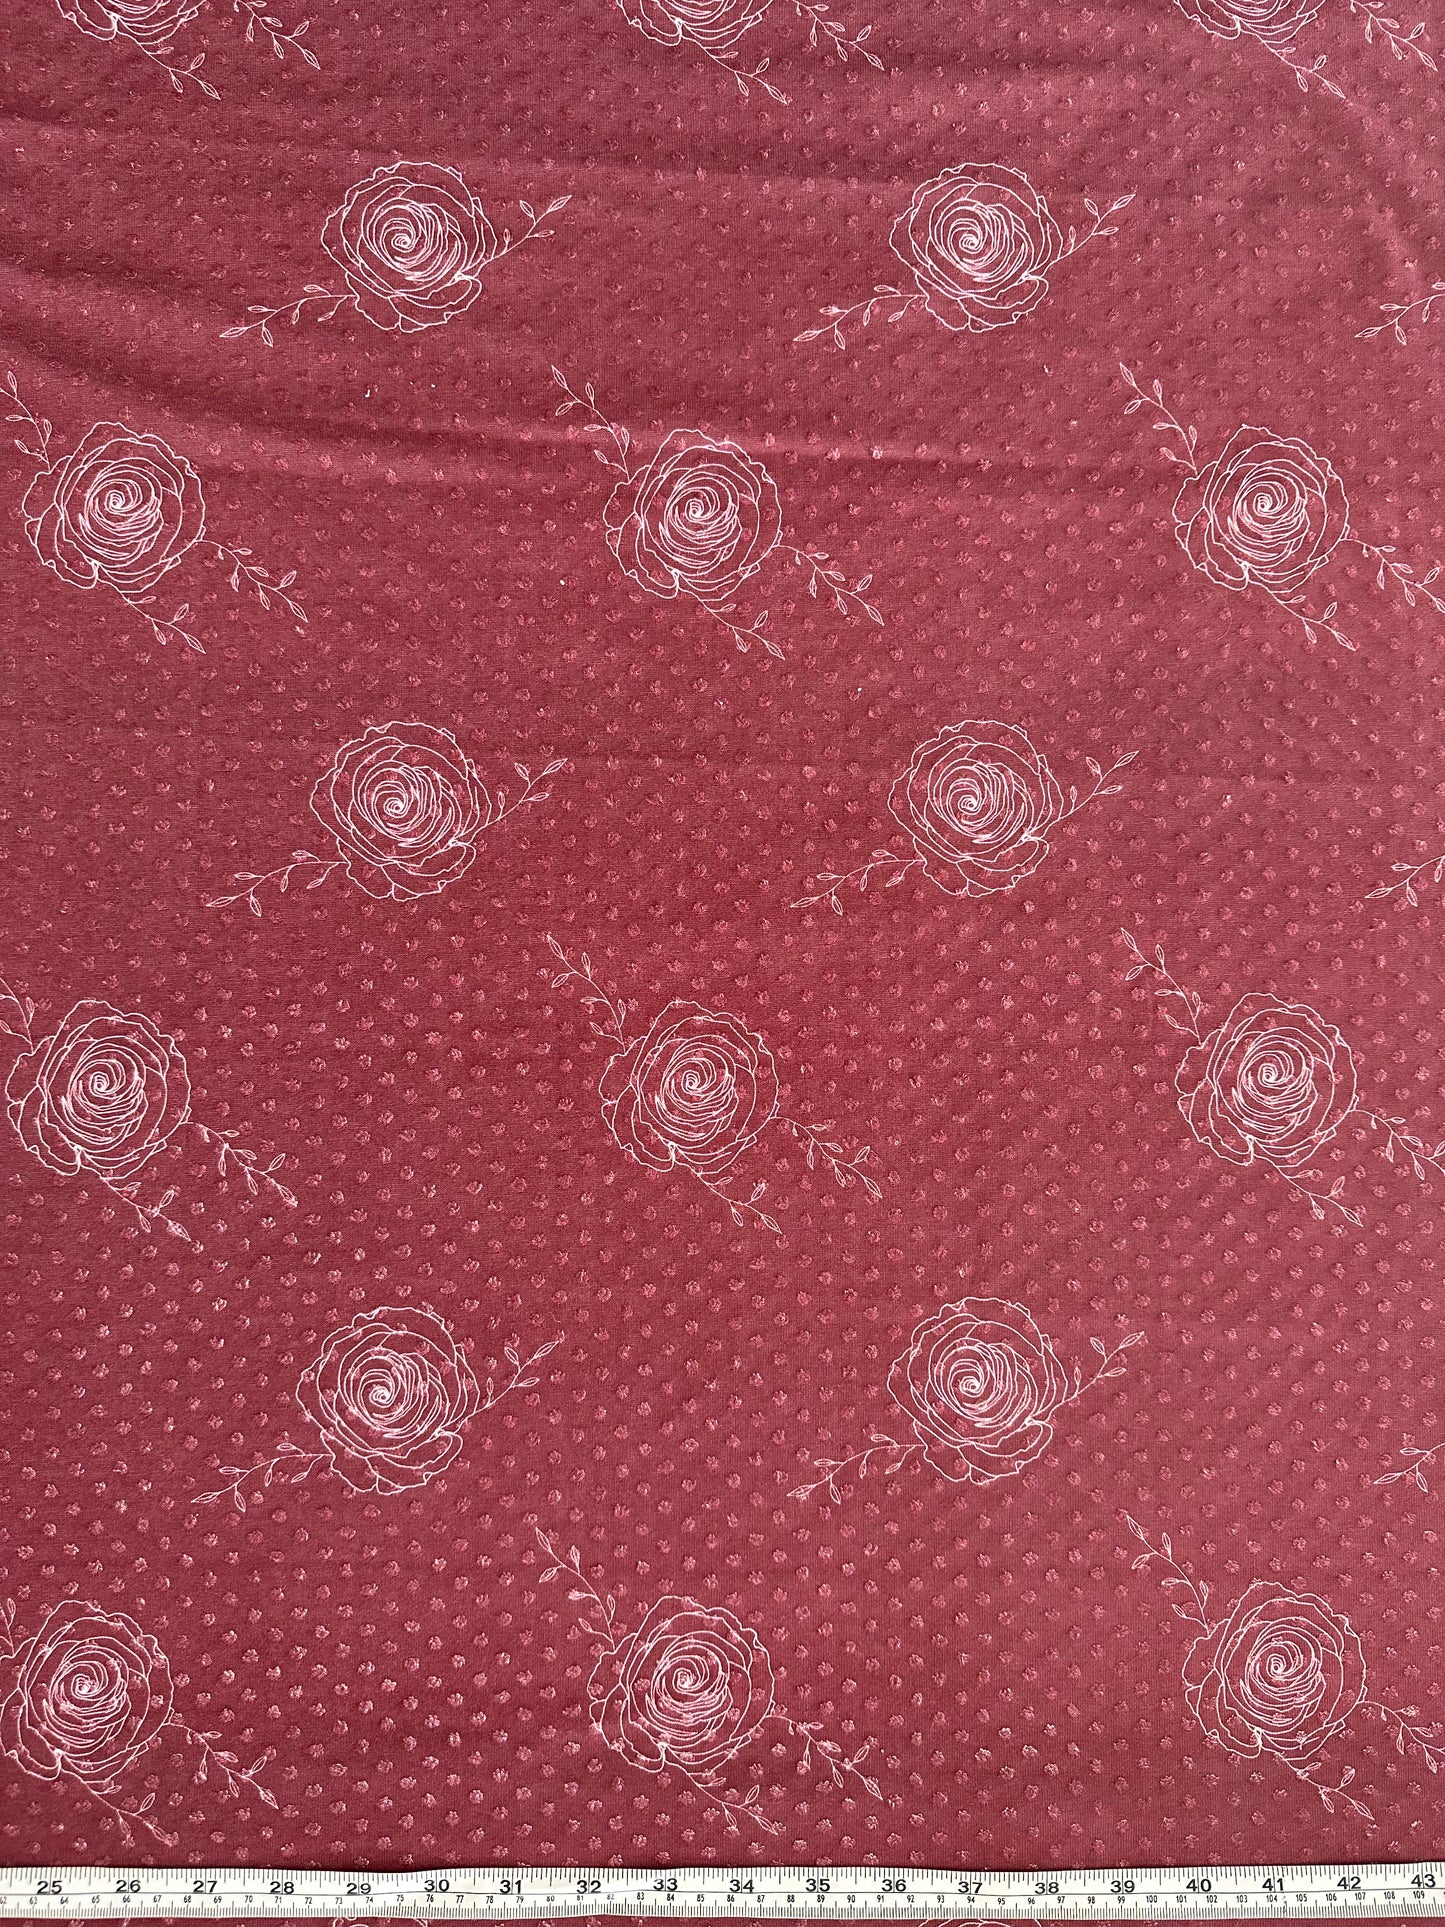 Simple Rose in Burgundy Red on Swiss Dot Knit Fabric Sold by the 1/4 yard